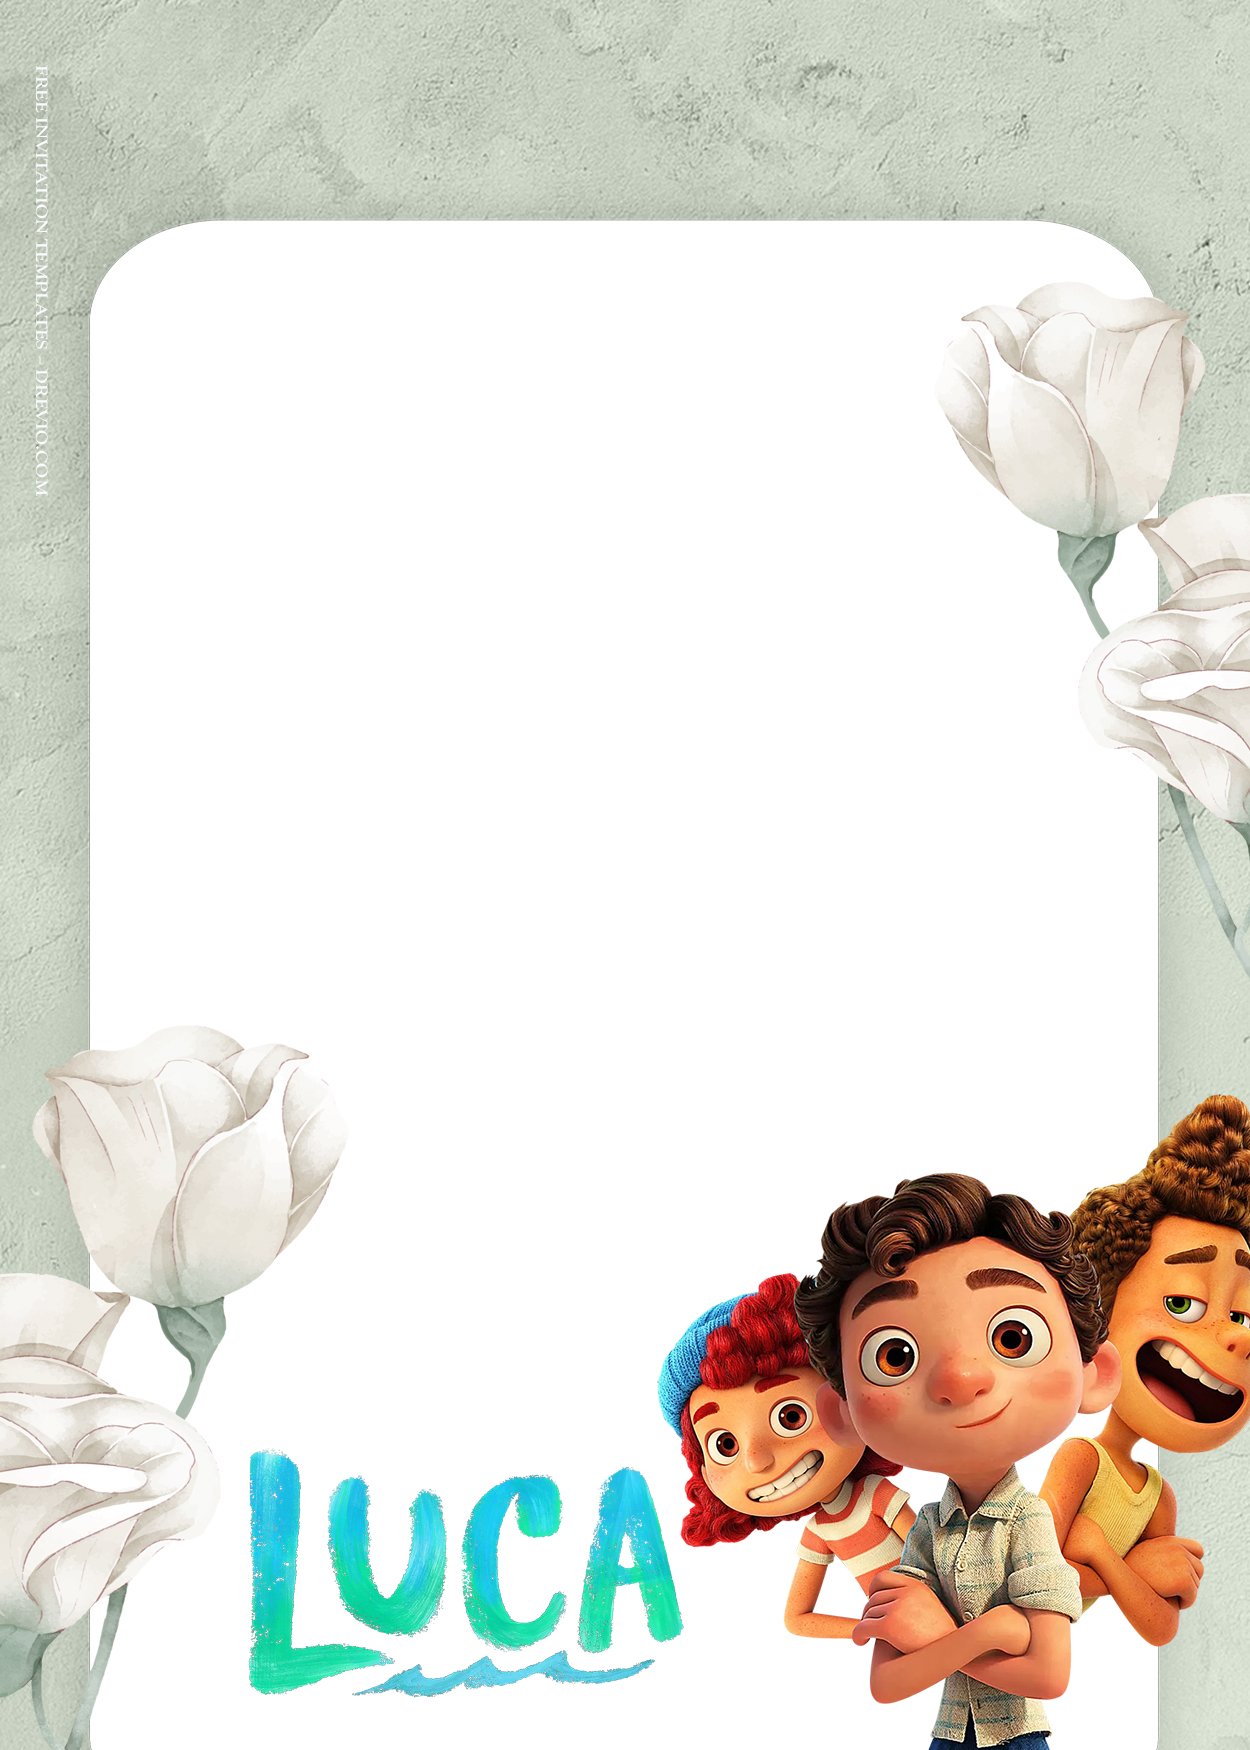 8+ Under Water Blossom With Luca Birthday Invitation Templates Four